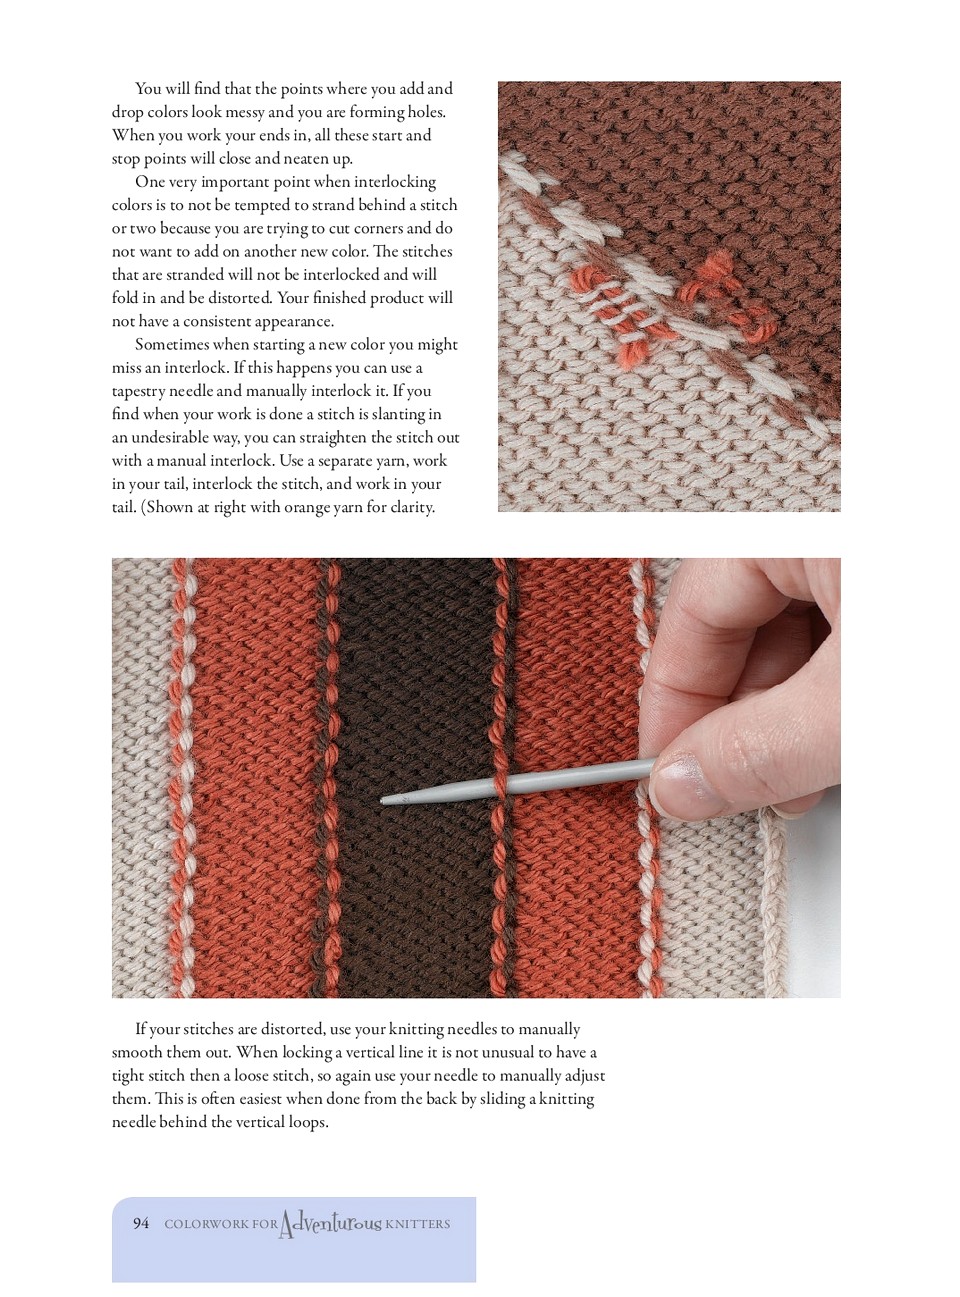 Colorwork-for Adventurous-Knitters-ng